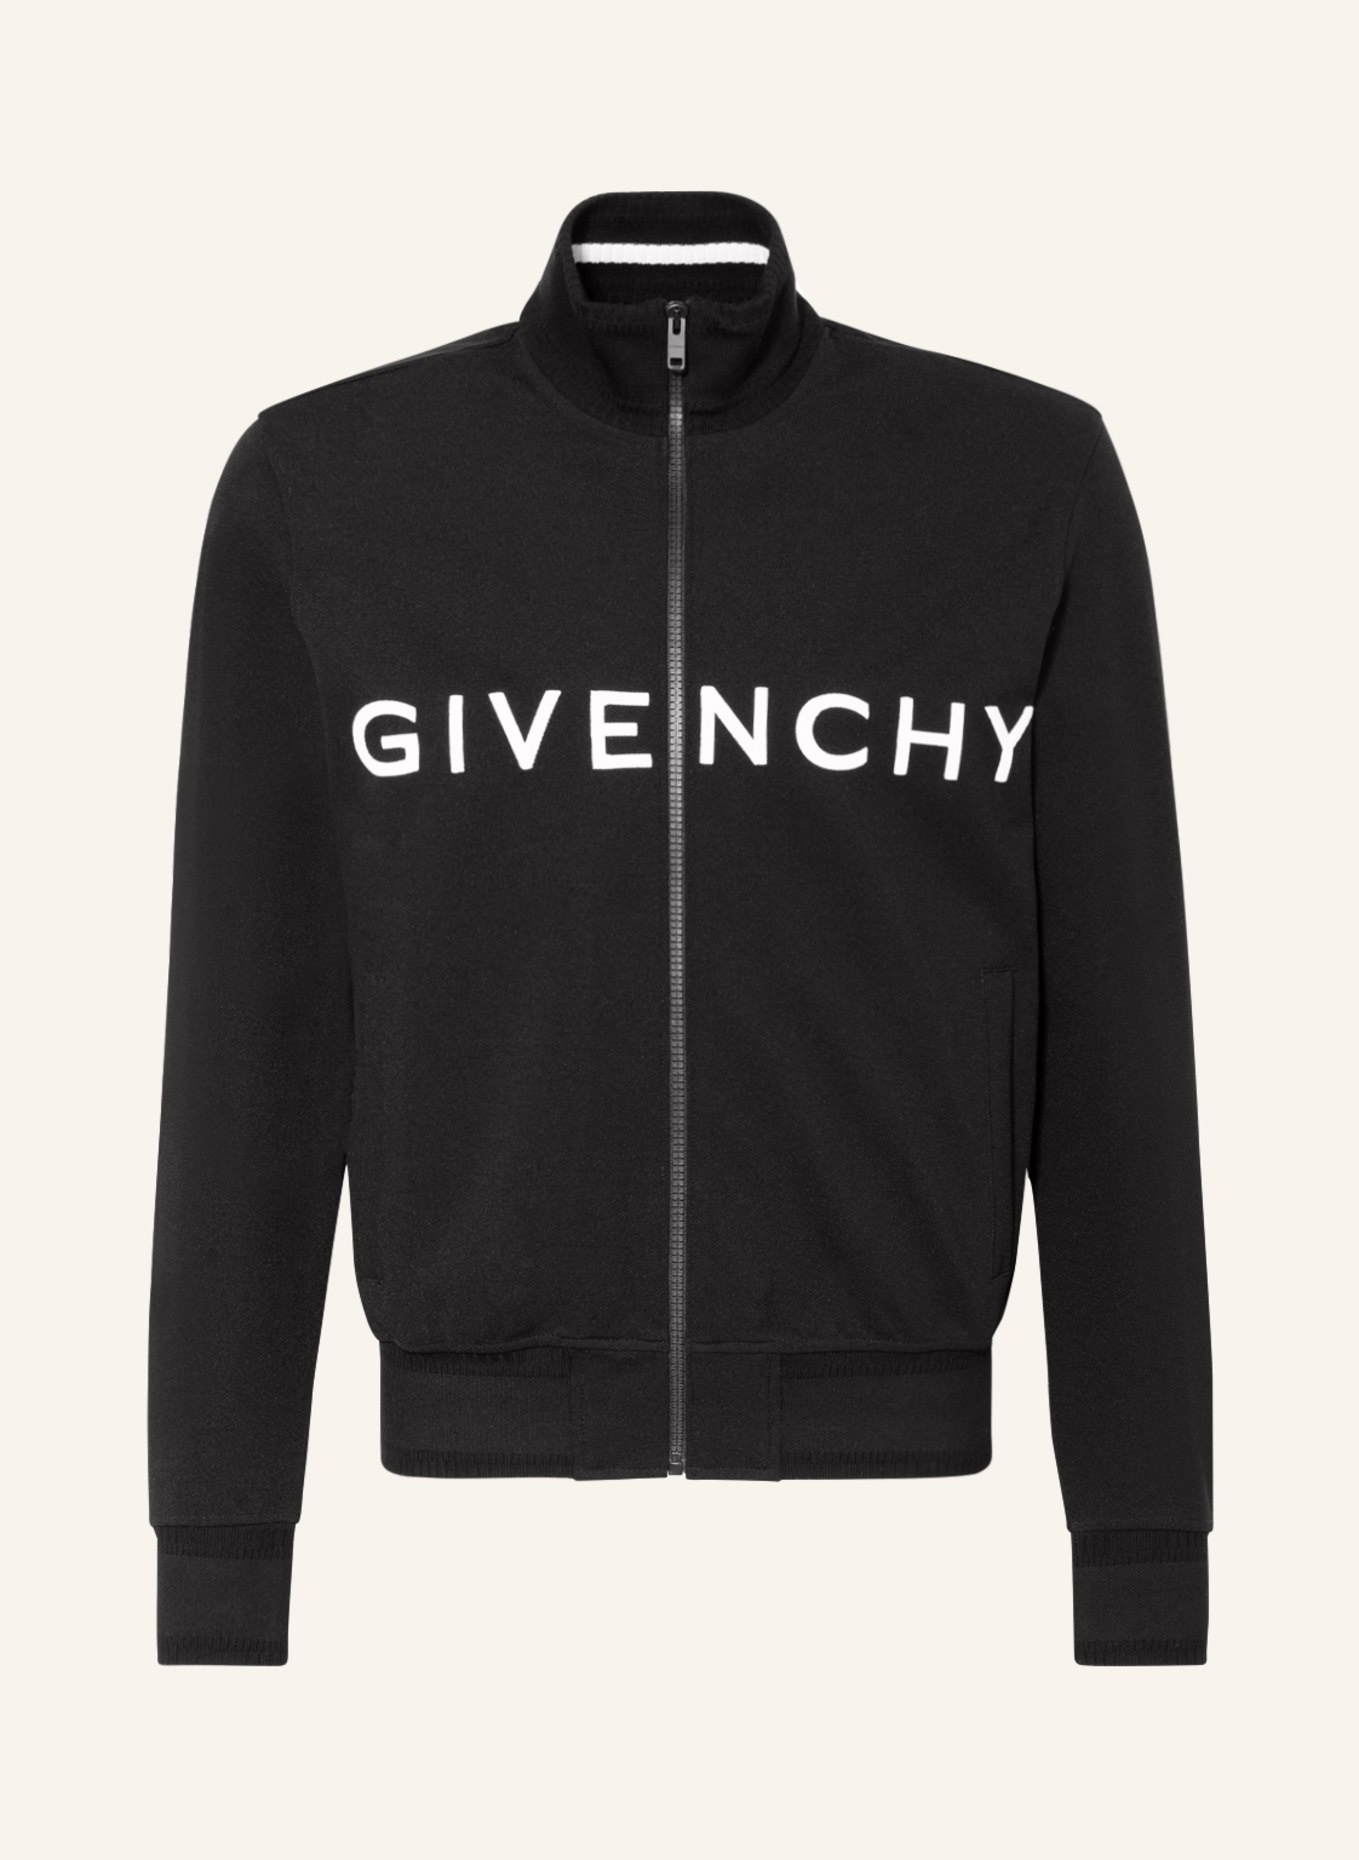 GIVENCHY Jacket in black